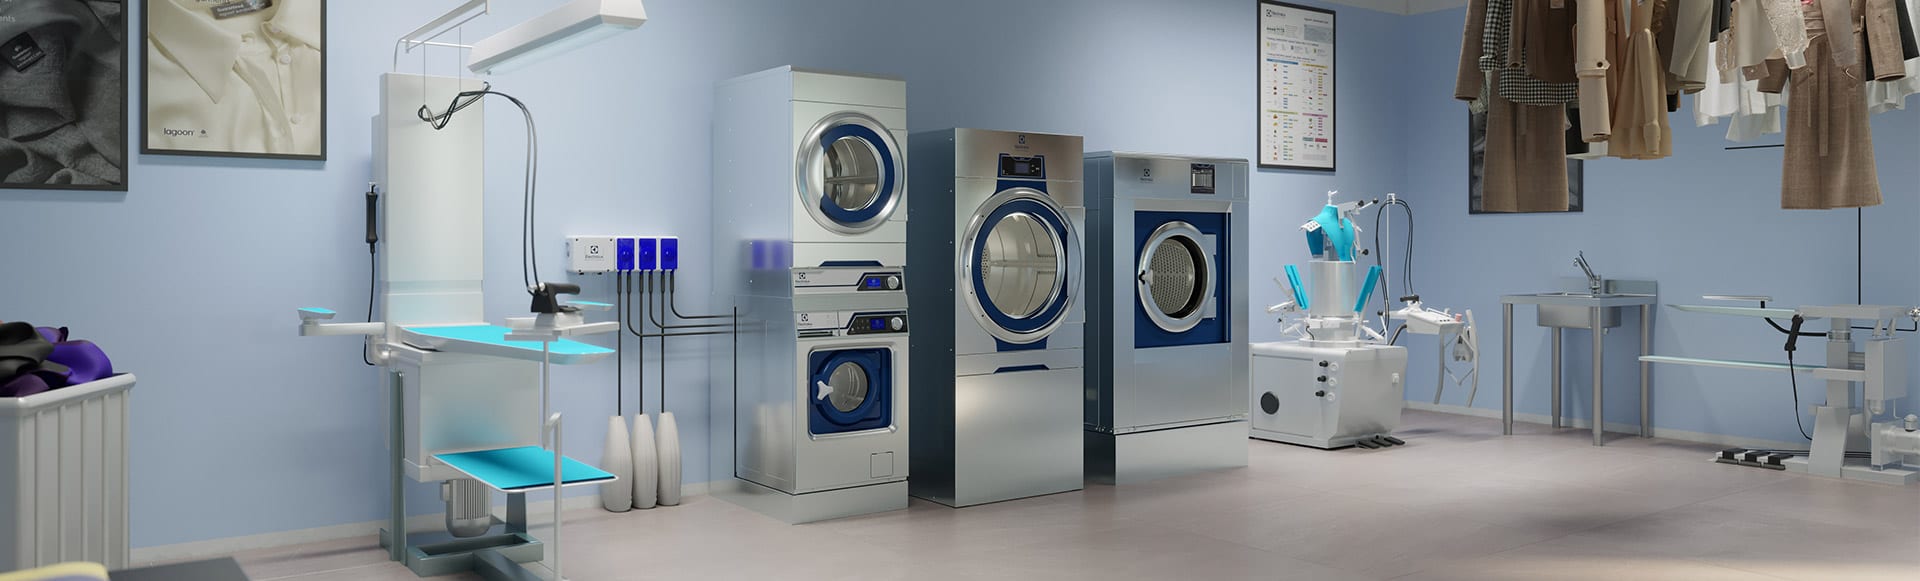 Wet cleaning for delicate clothes - Electrolux Professional